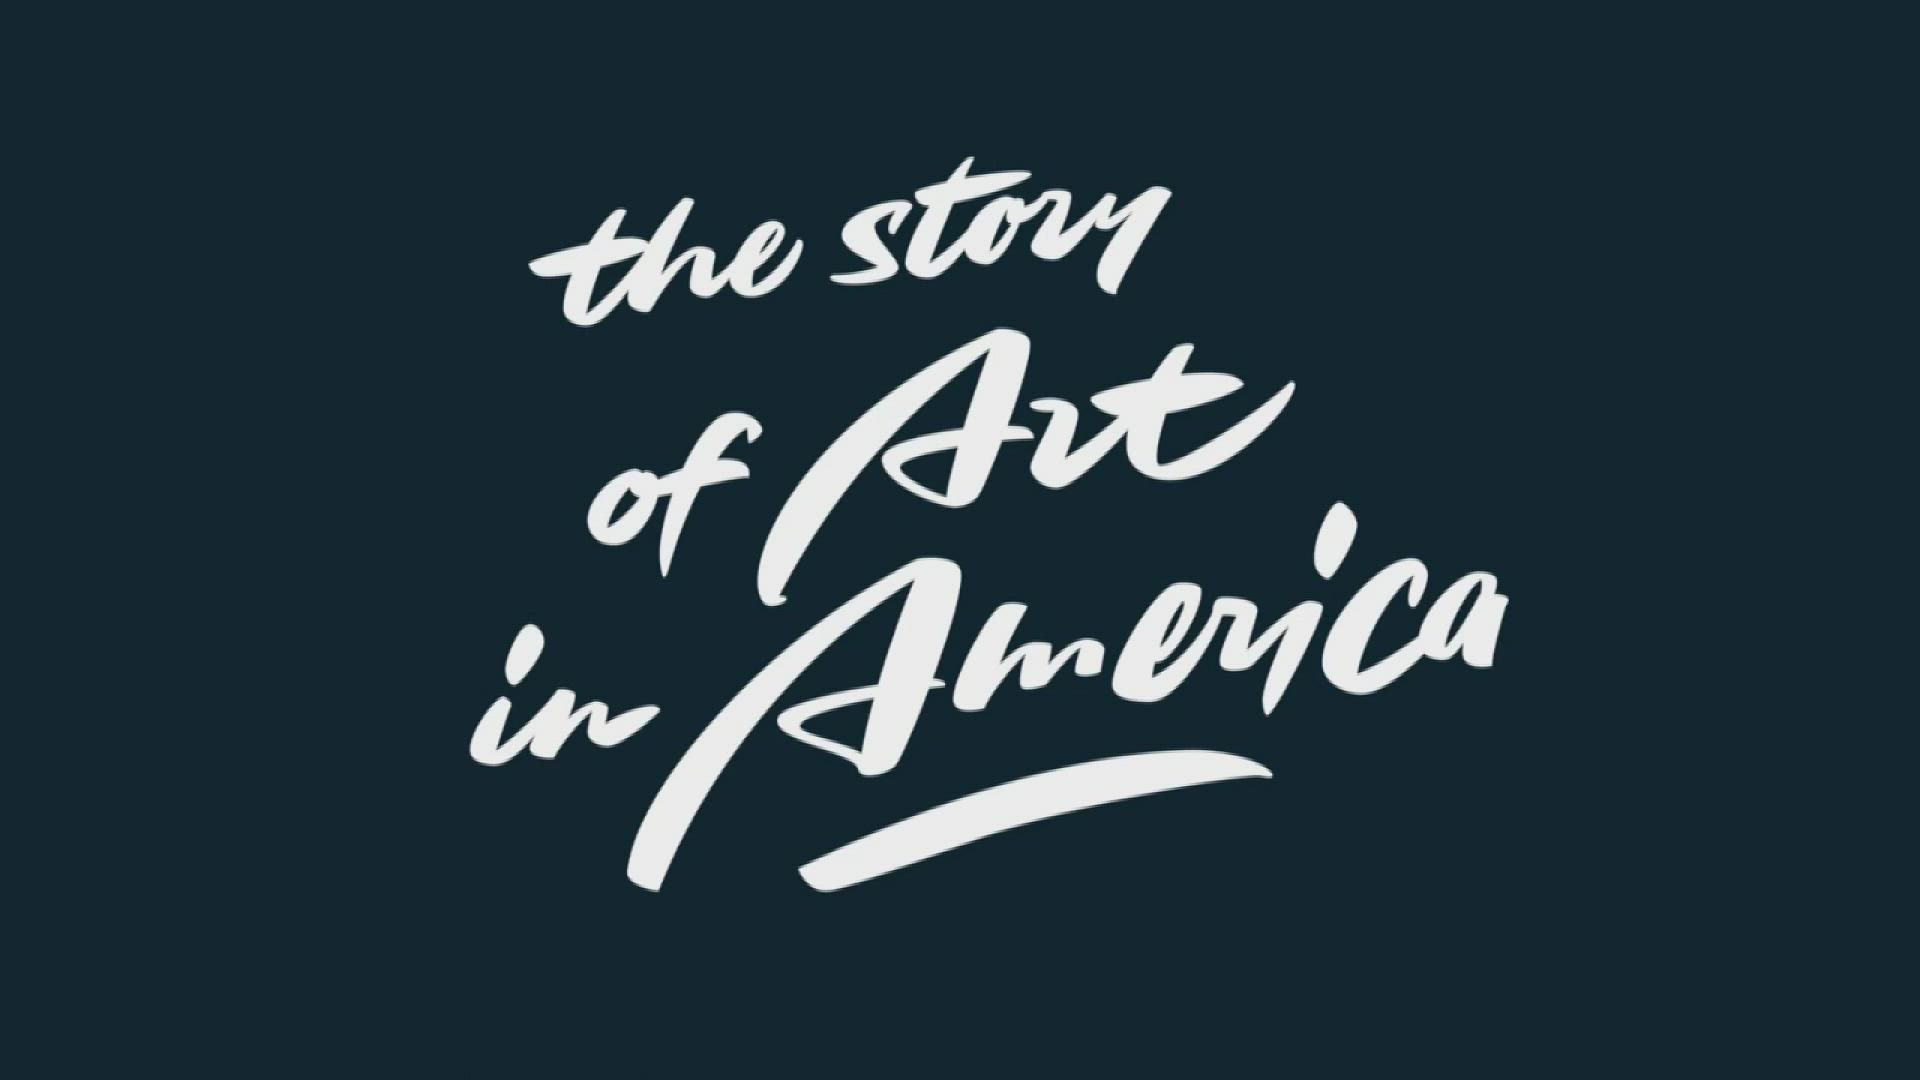 "The Story of Art in America" will be debuting its third season in May.